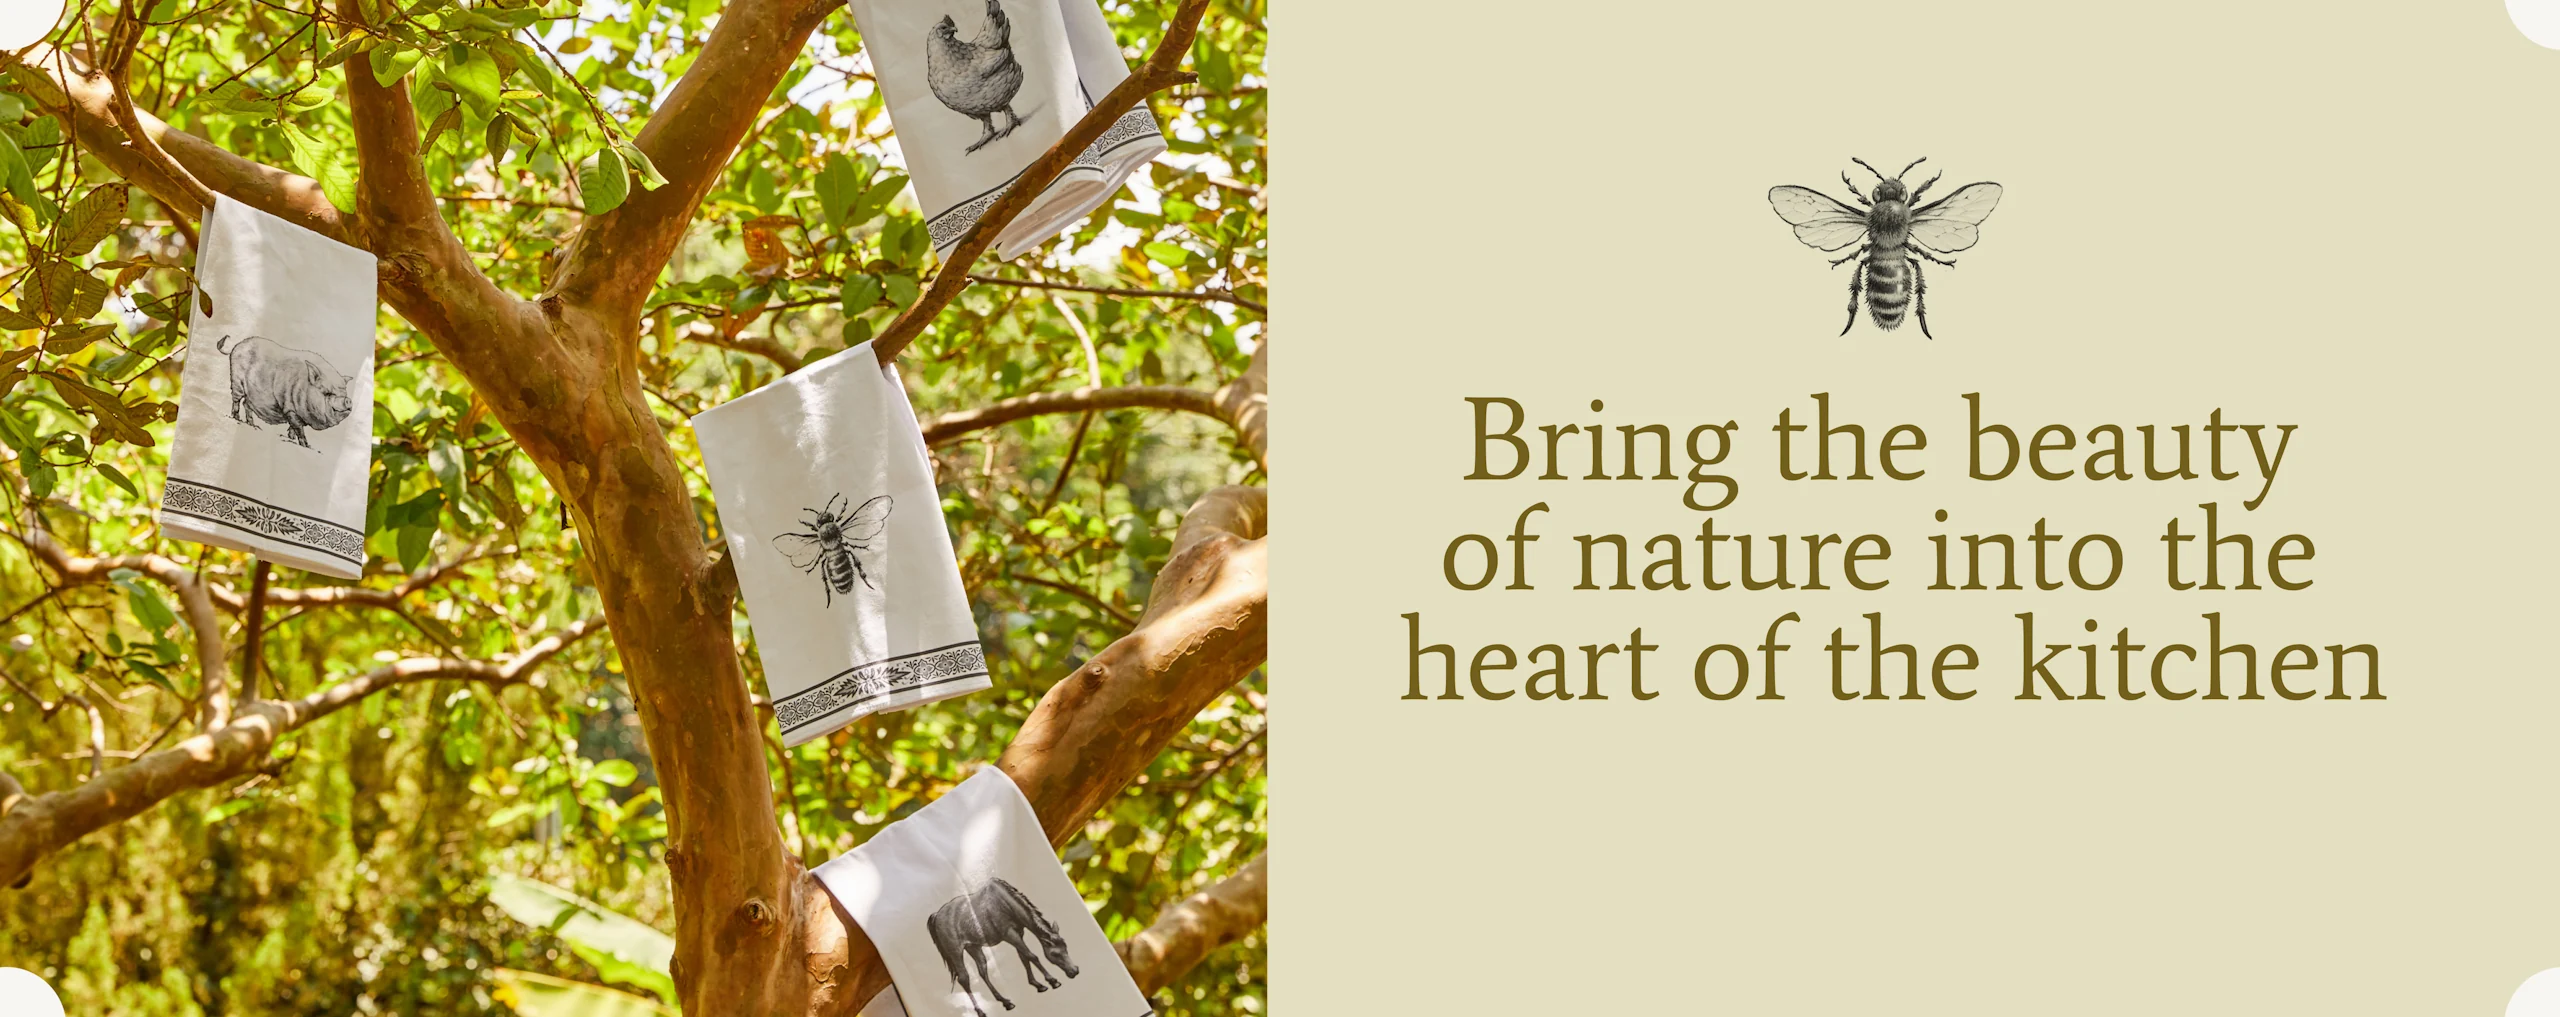 bring the beauty of nature into the heart of the kitchen